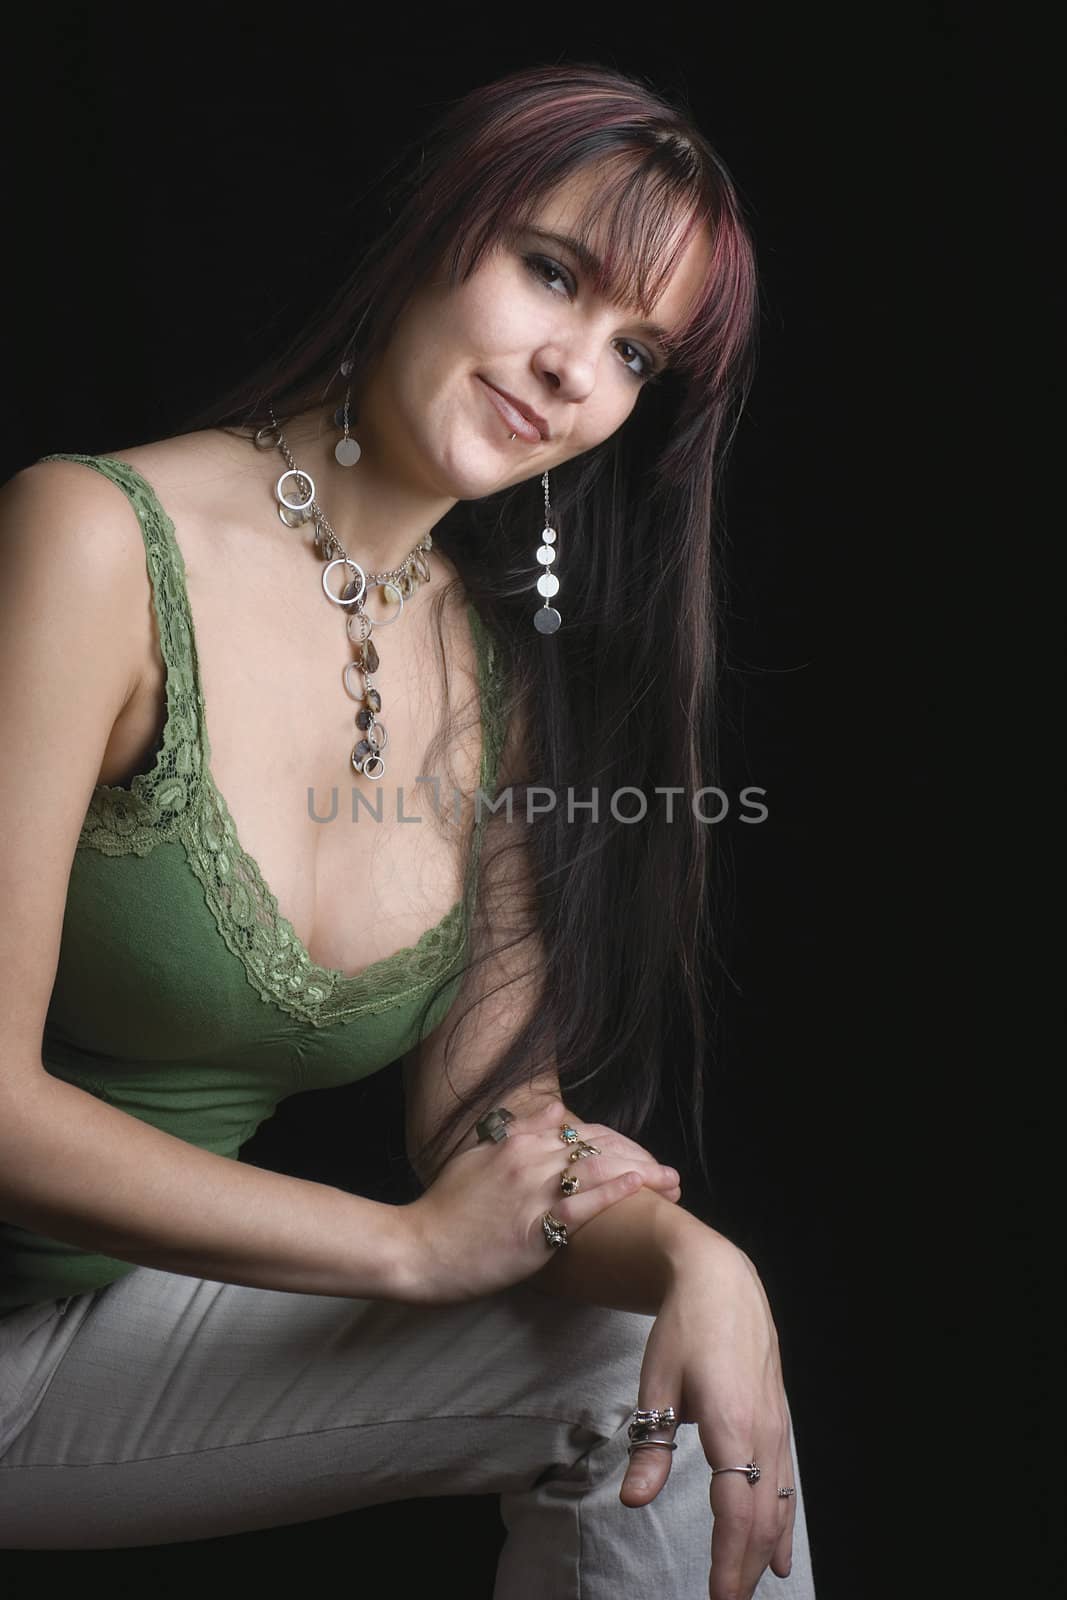 Fashion model leaning with shy smile by mypstudio